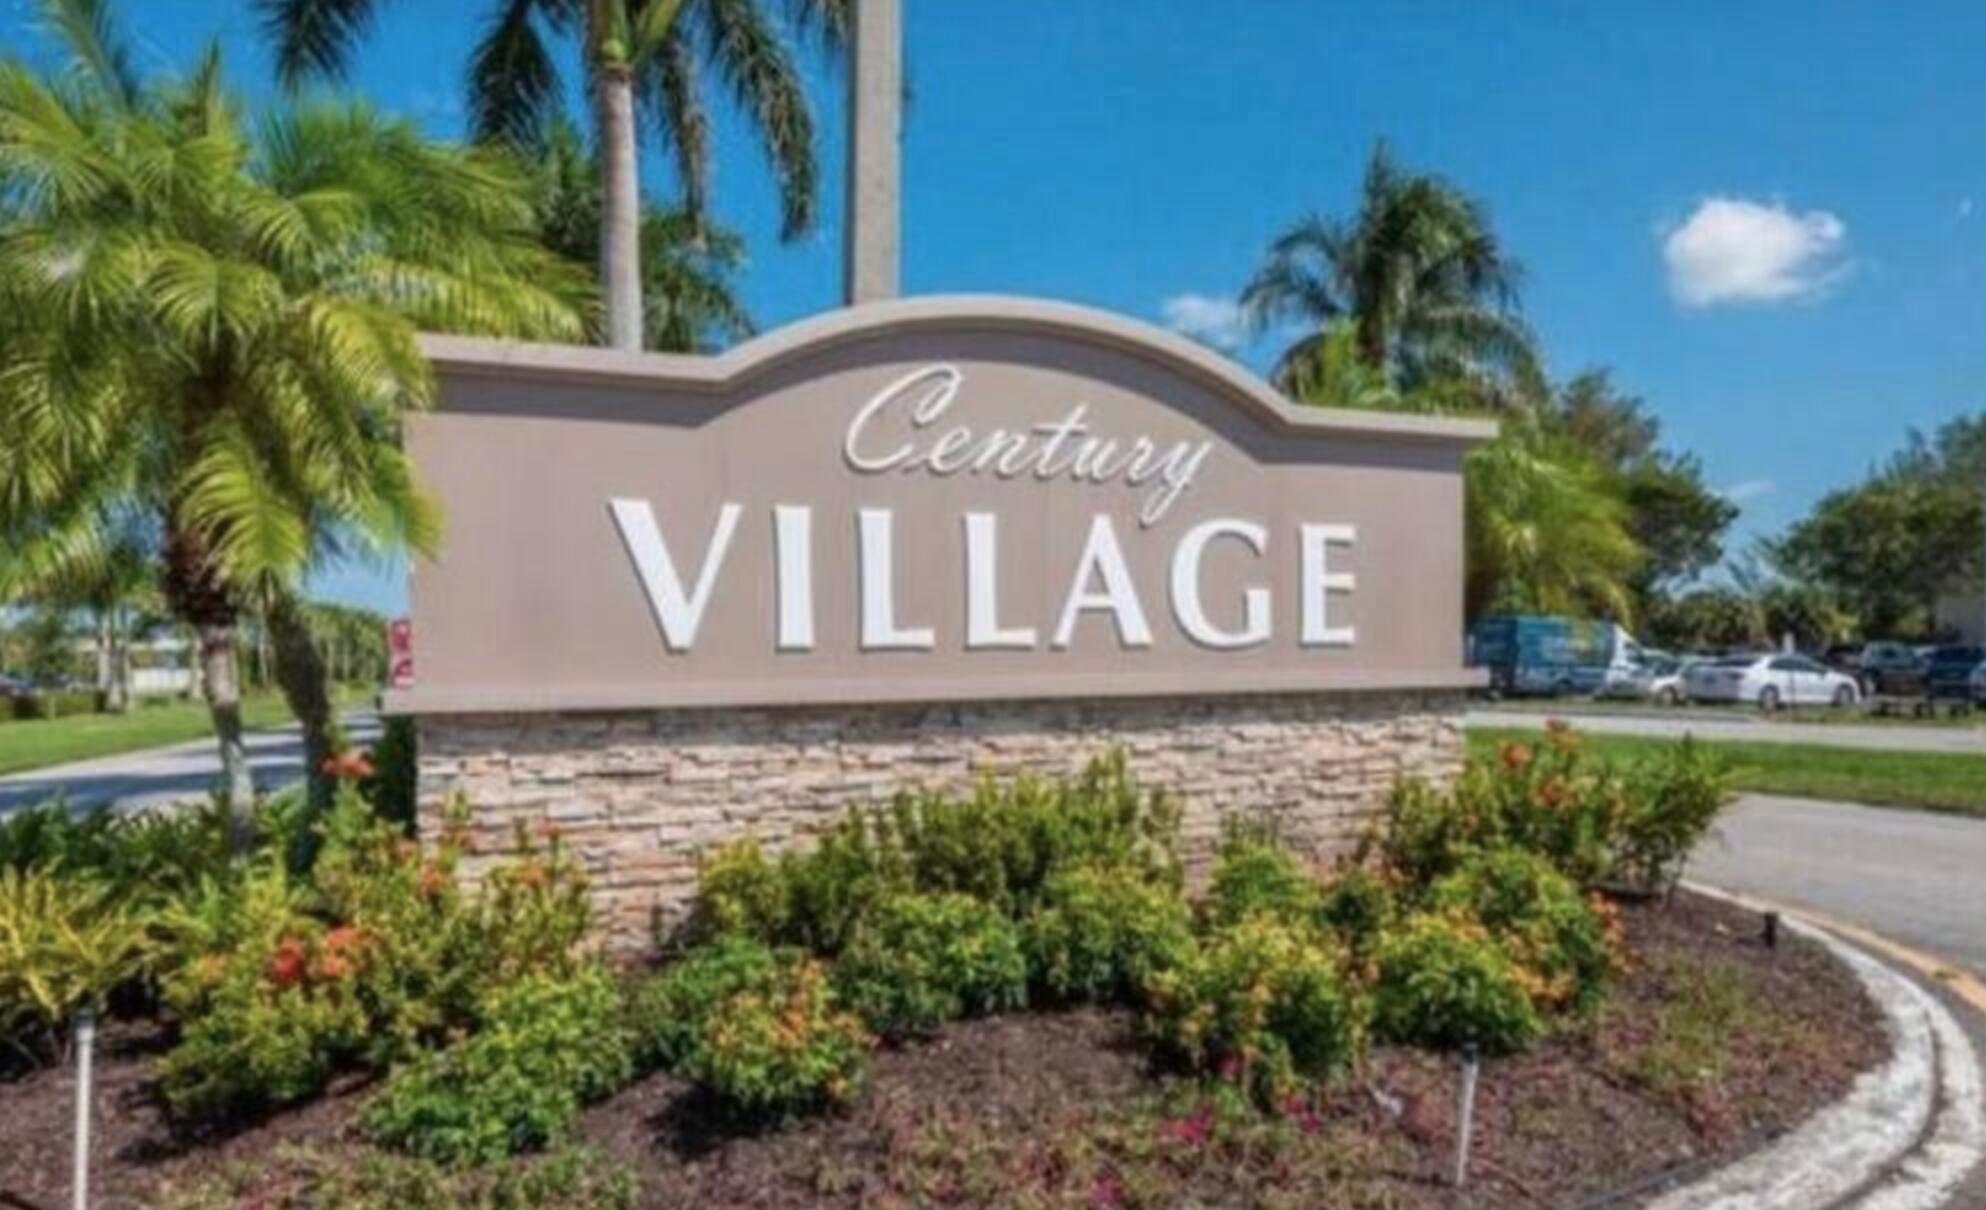 149 Hastings I 149, West Palm Beach, Palm Beach County, Florida - 2 Bedrooms  
1.5 Bathrooms - 